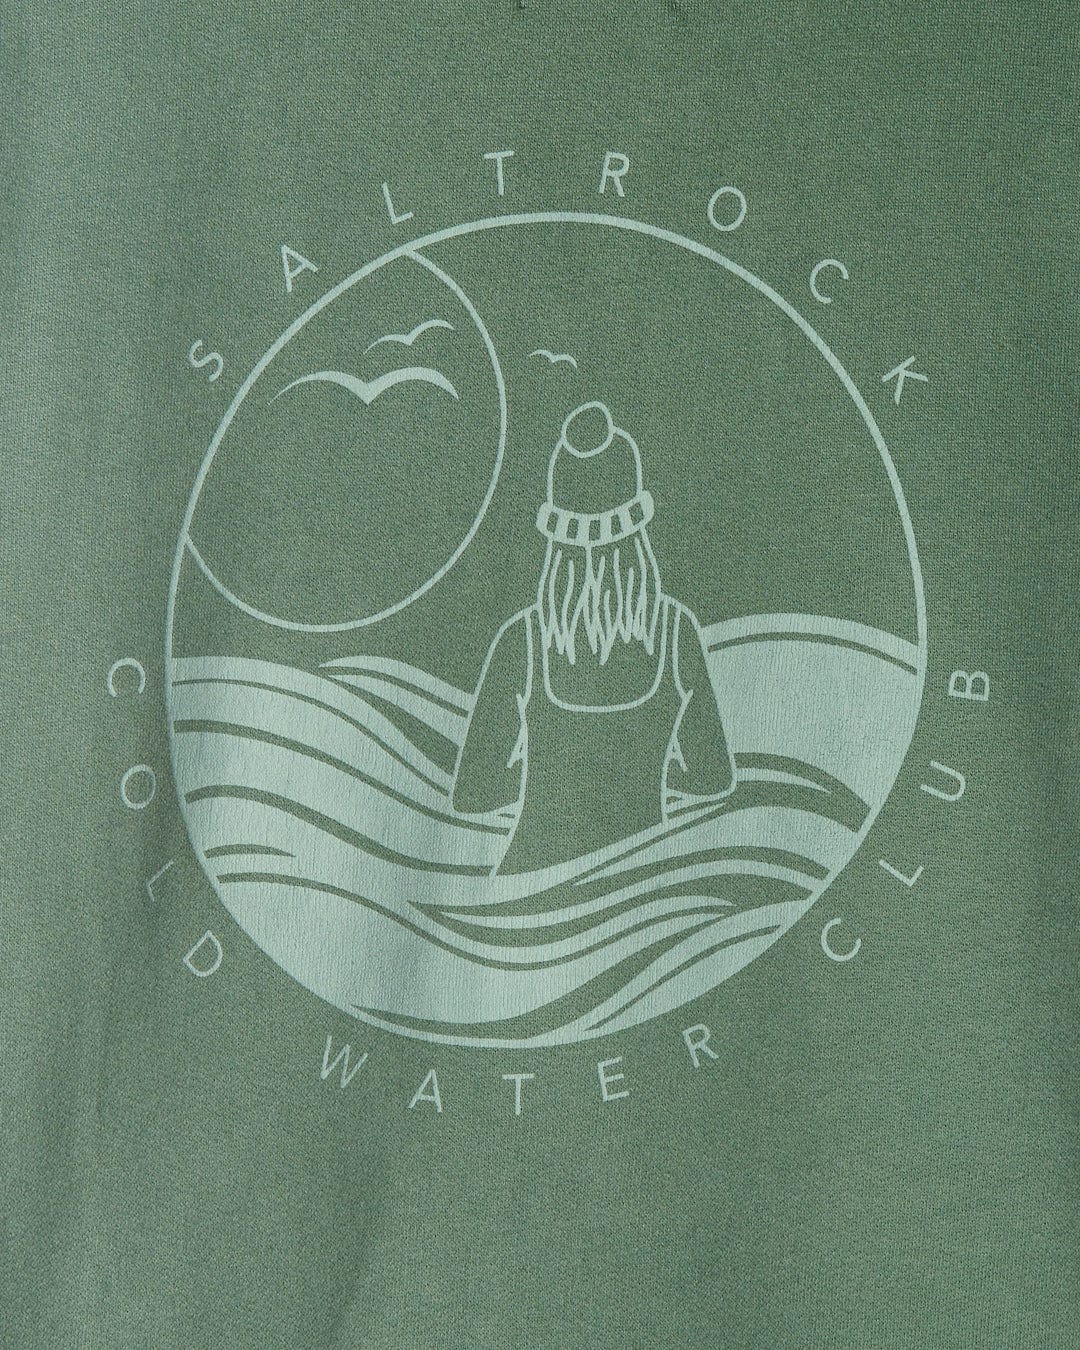 Circular logo of Saltrock's Coldwater Club featuring a stylized ocean wave design and a figure in a beanie, printed on the Ladies Zip Hoodie in Green fabric with a peached soft hand feel finish.